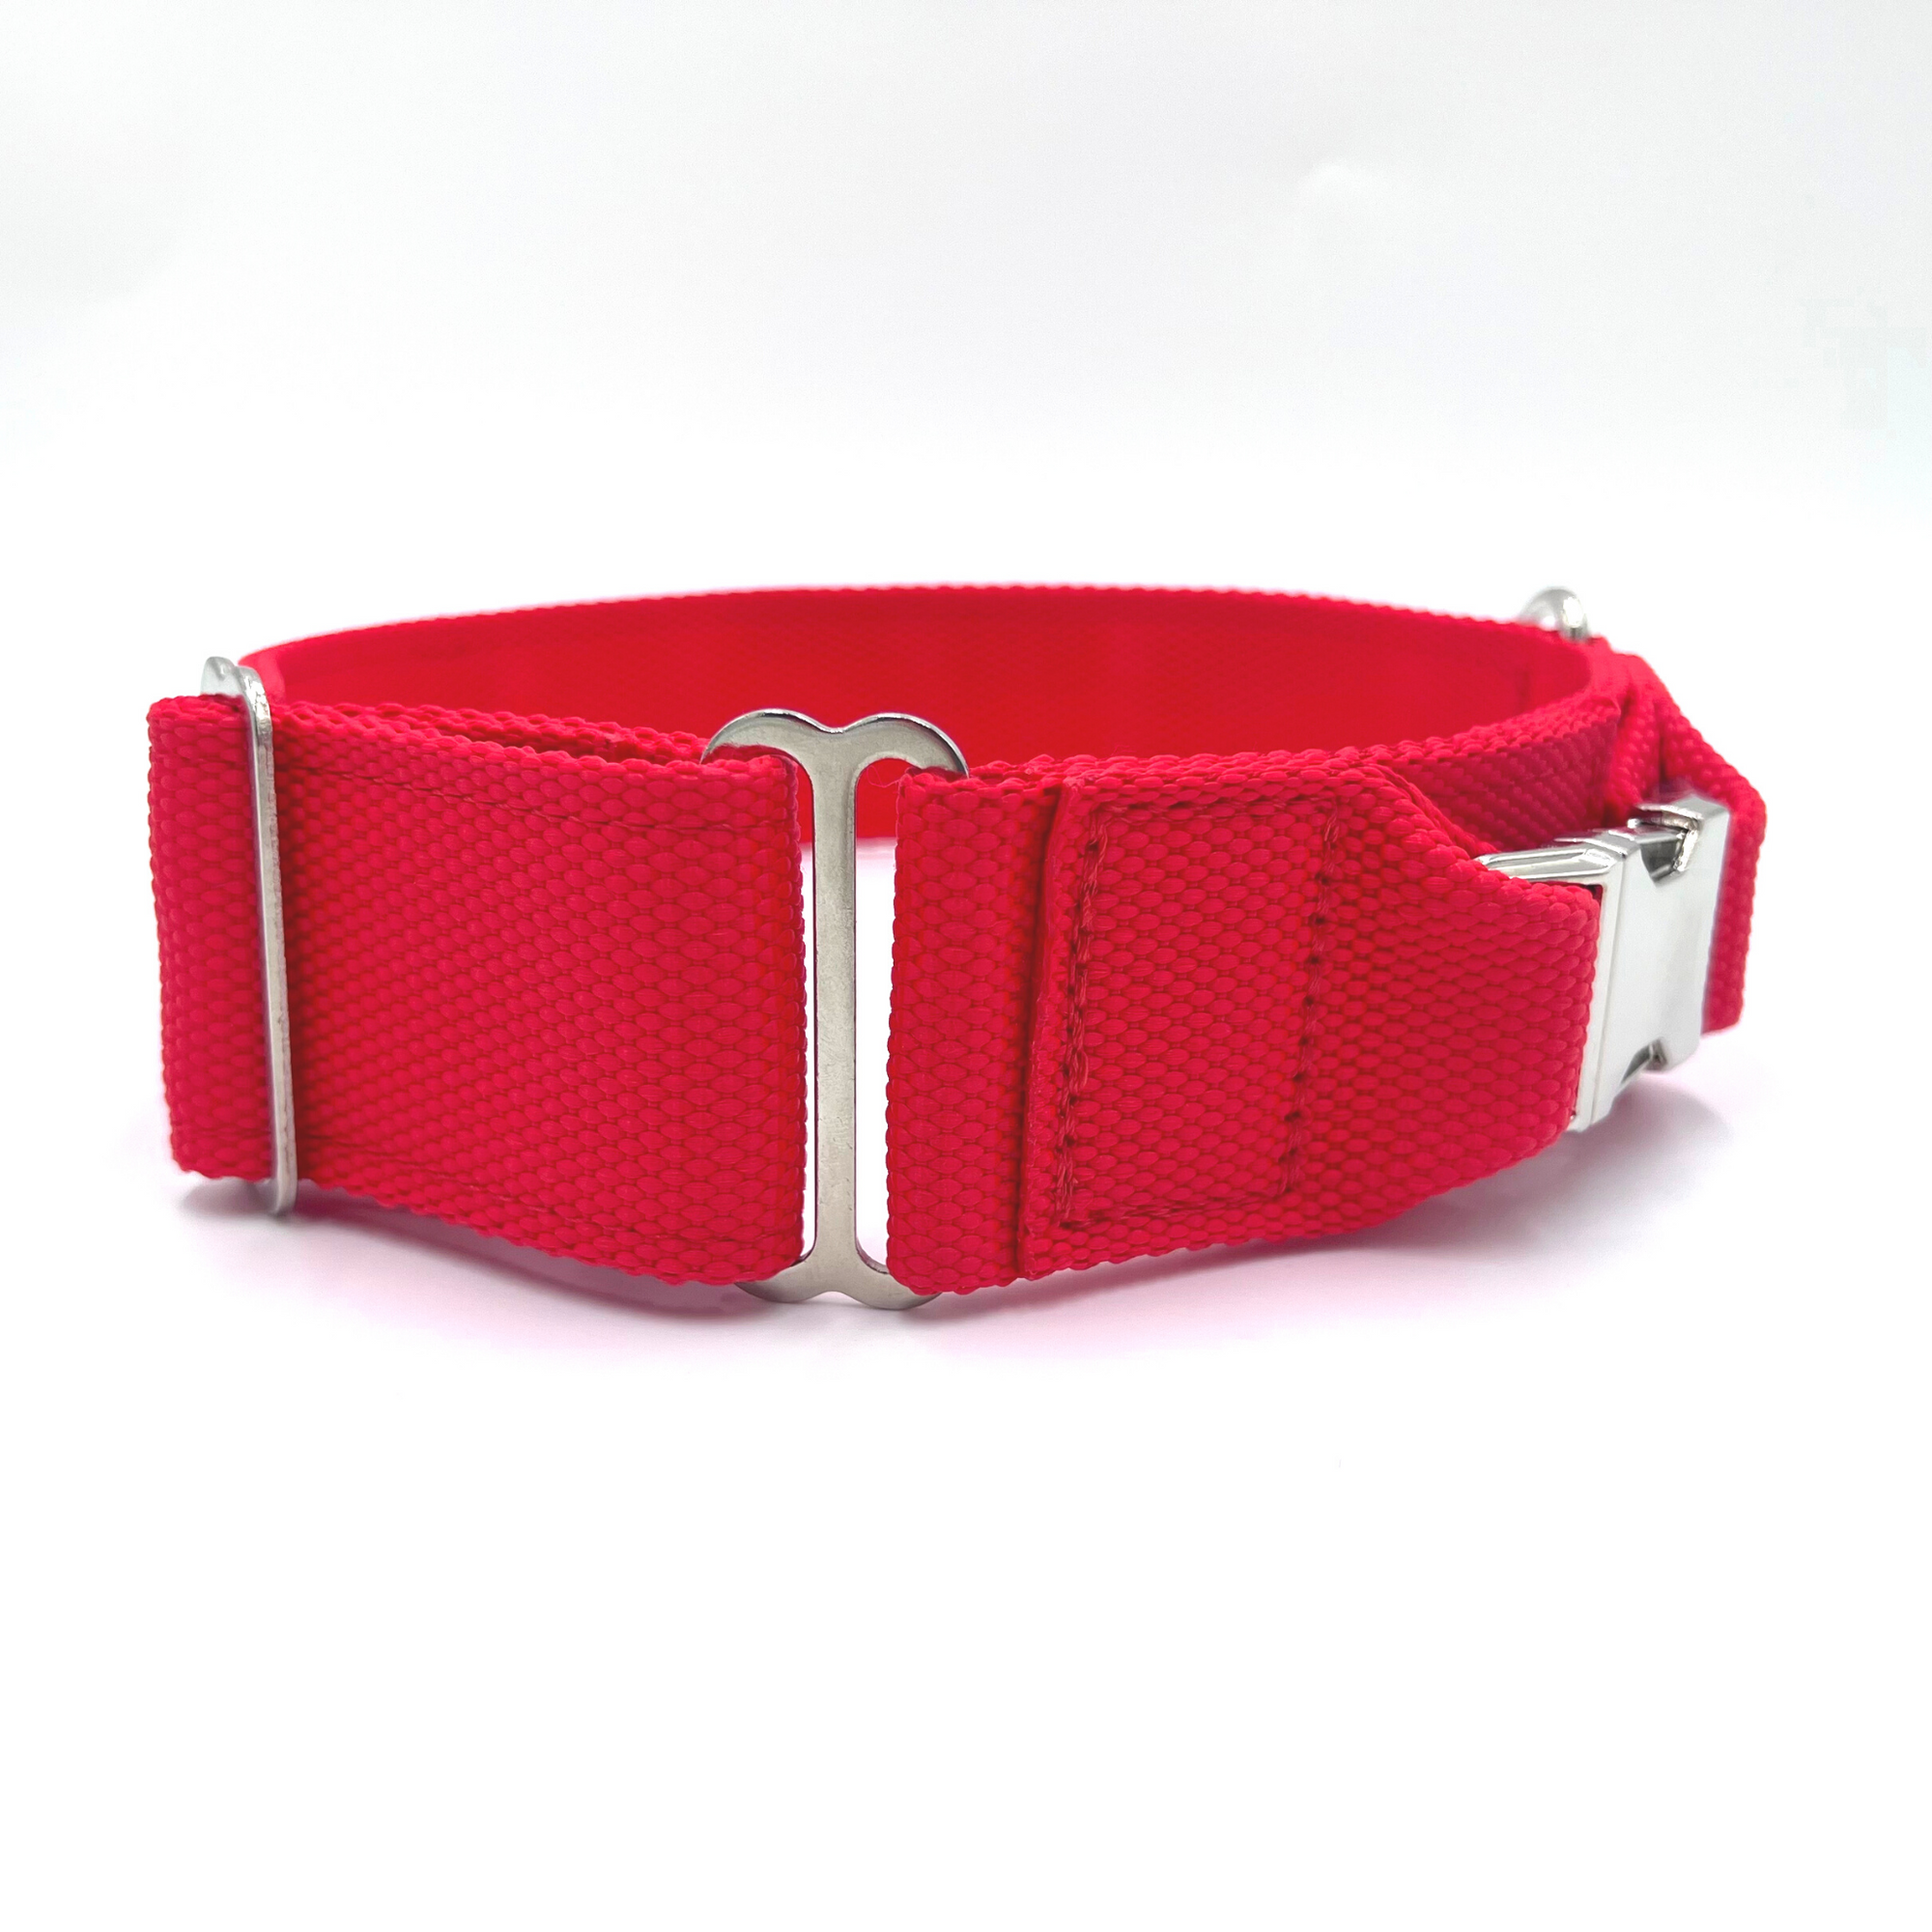 Wide collar for a dog